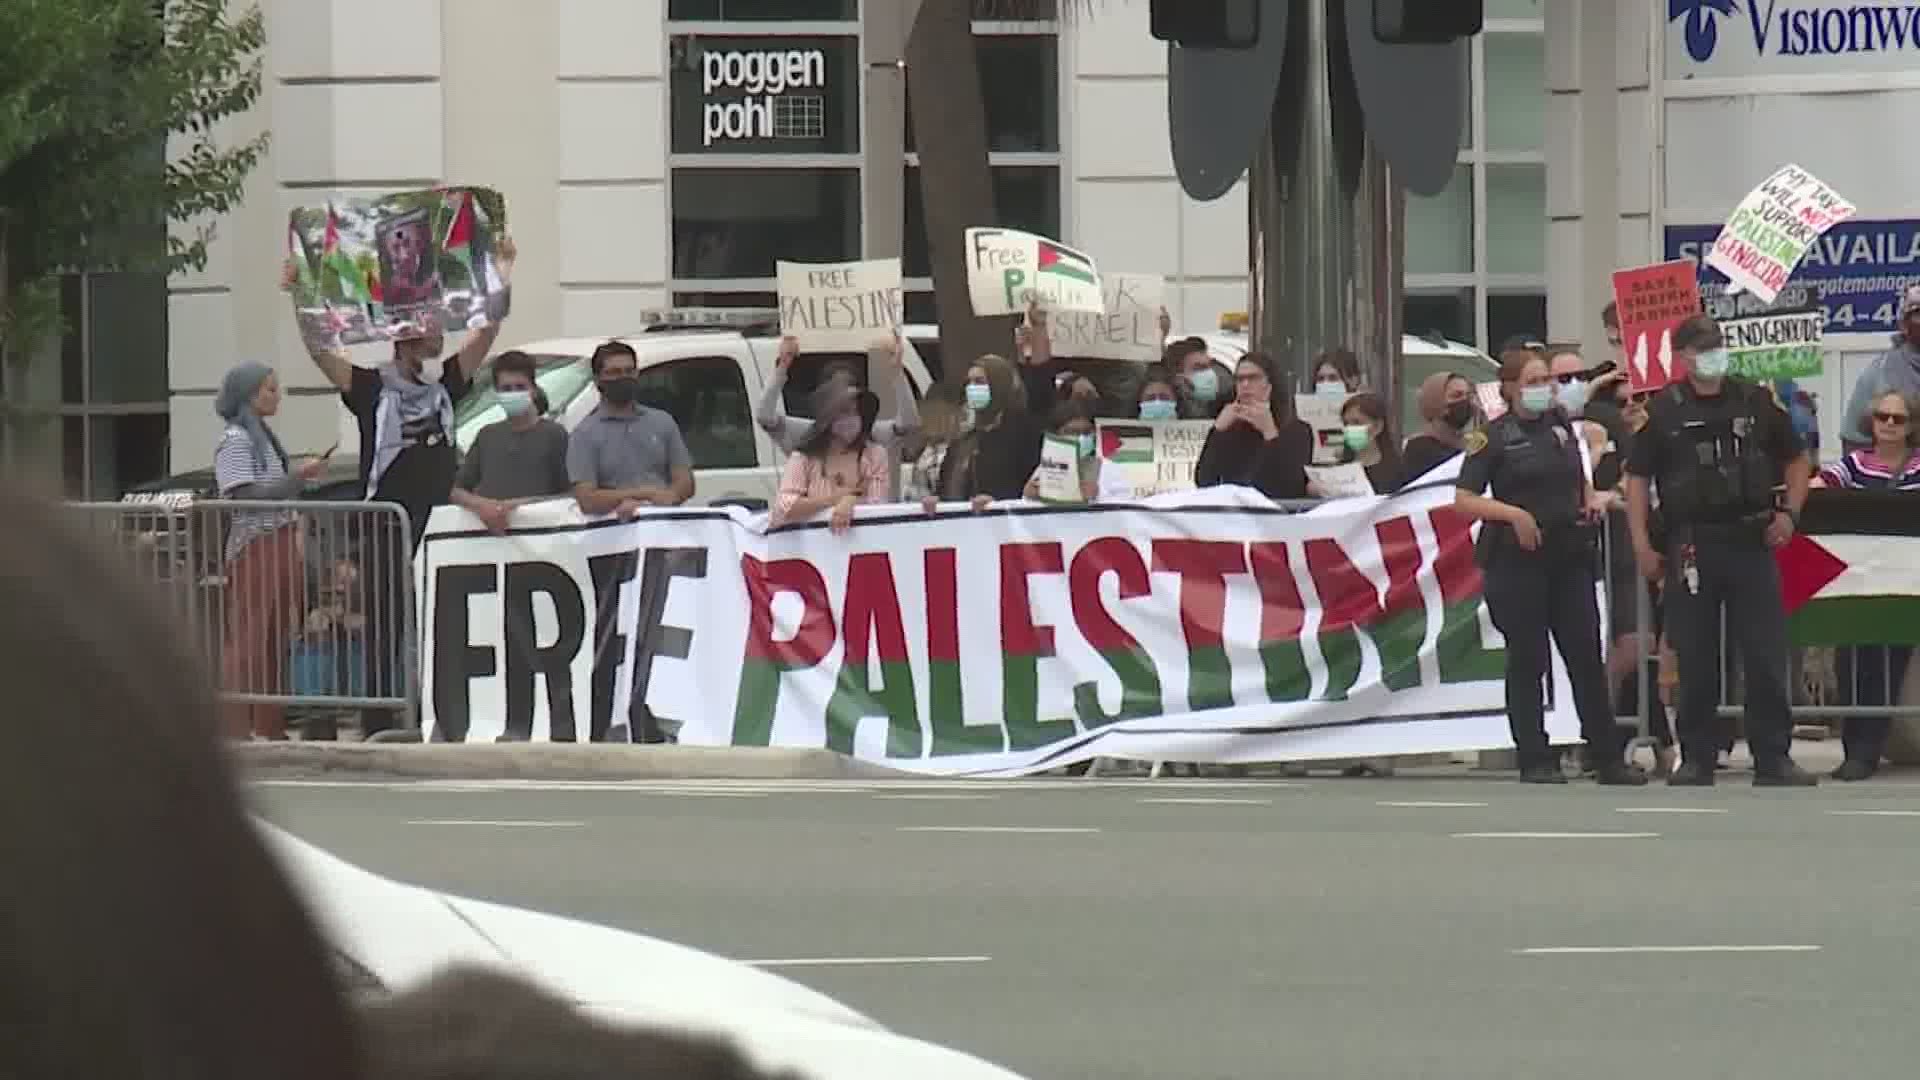 Dozens of people gathered Saturday near Westheimer and Post Oak Boulevard to show solidary with Palestine, organizers said.